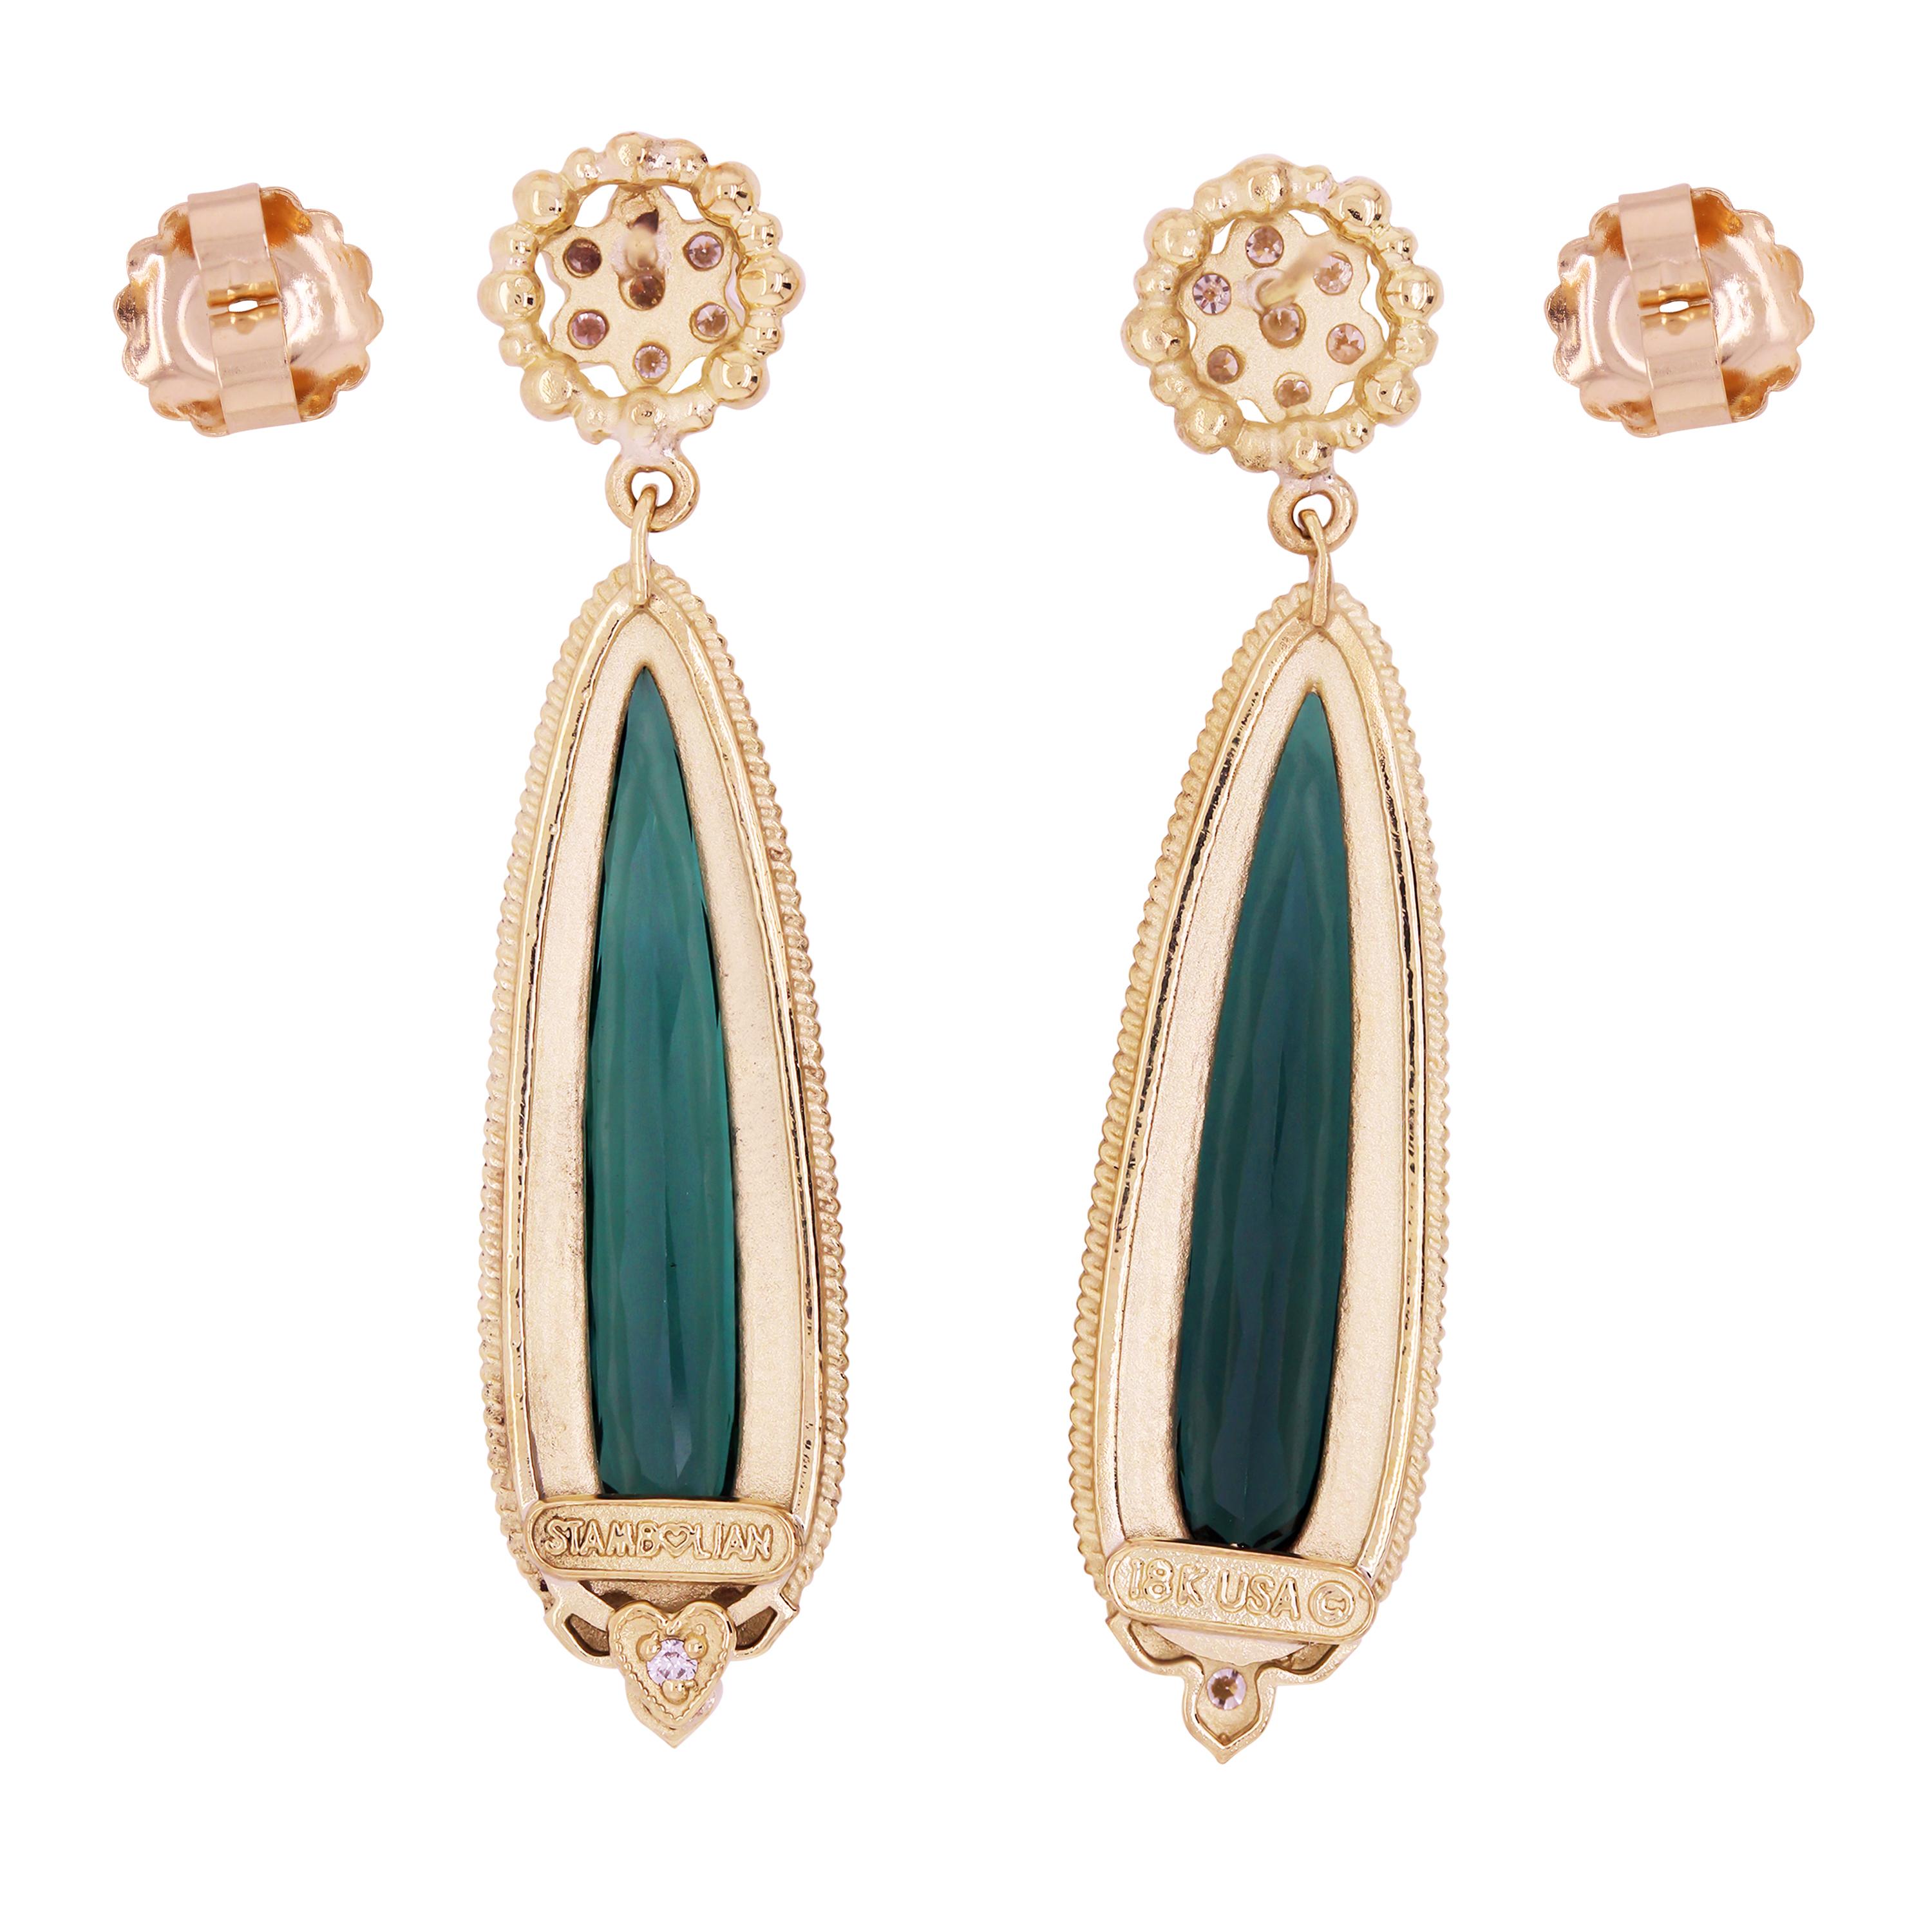 18K Yellow Gold and Diamond Drop Earrings with Pearshape Green Tourmalines and Diamonds by Stambolian

This one-of-a-kind pair of earrings by Stambolian is a true statement piece brings to life the combination of natural beauty along with art